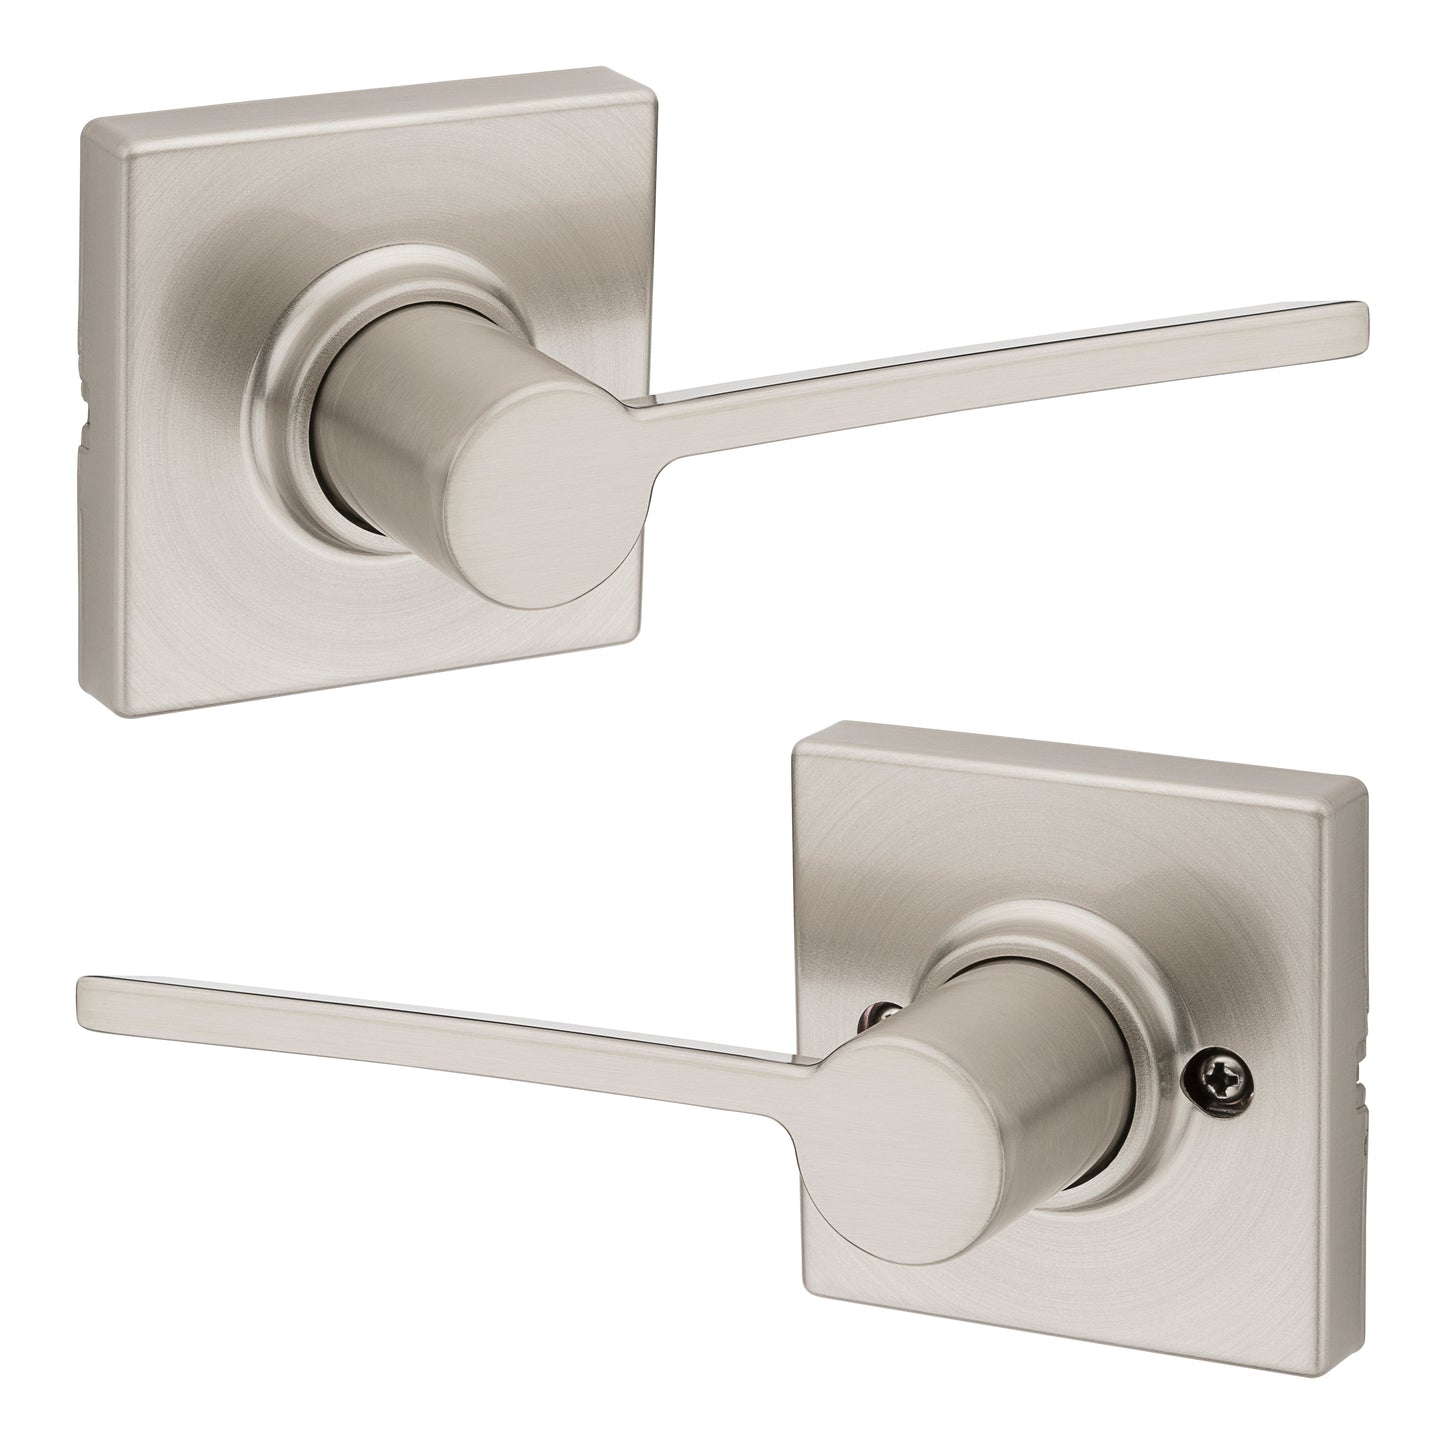 Kwikset 200LRLSQT-15 Ladera Lever with Square Rose Passage Door Lock with 6AL Latch and RCS Strike Satin Nickel Finish